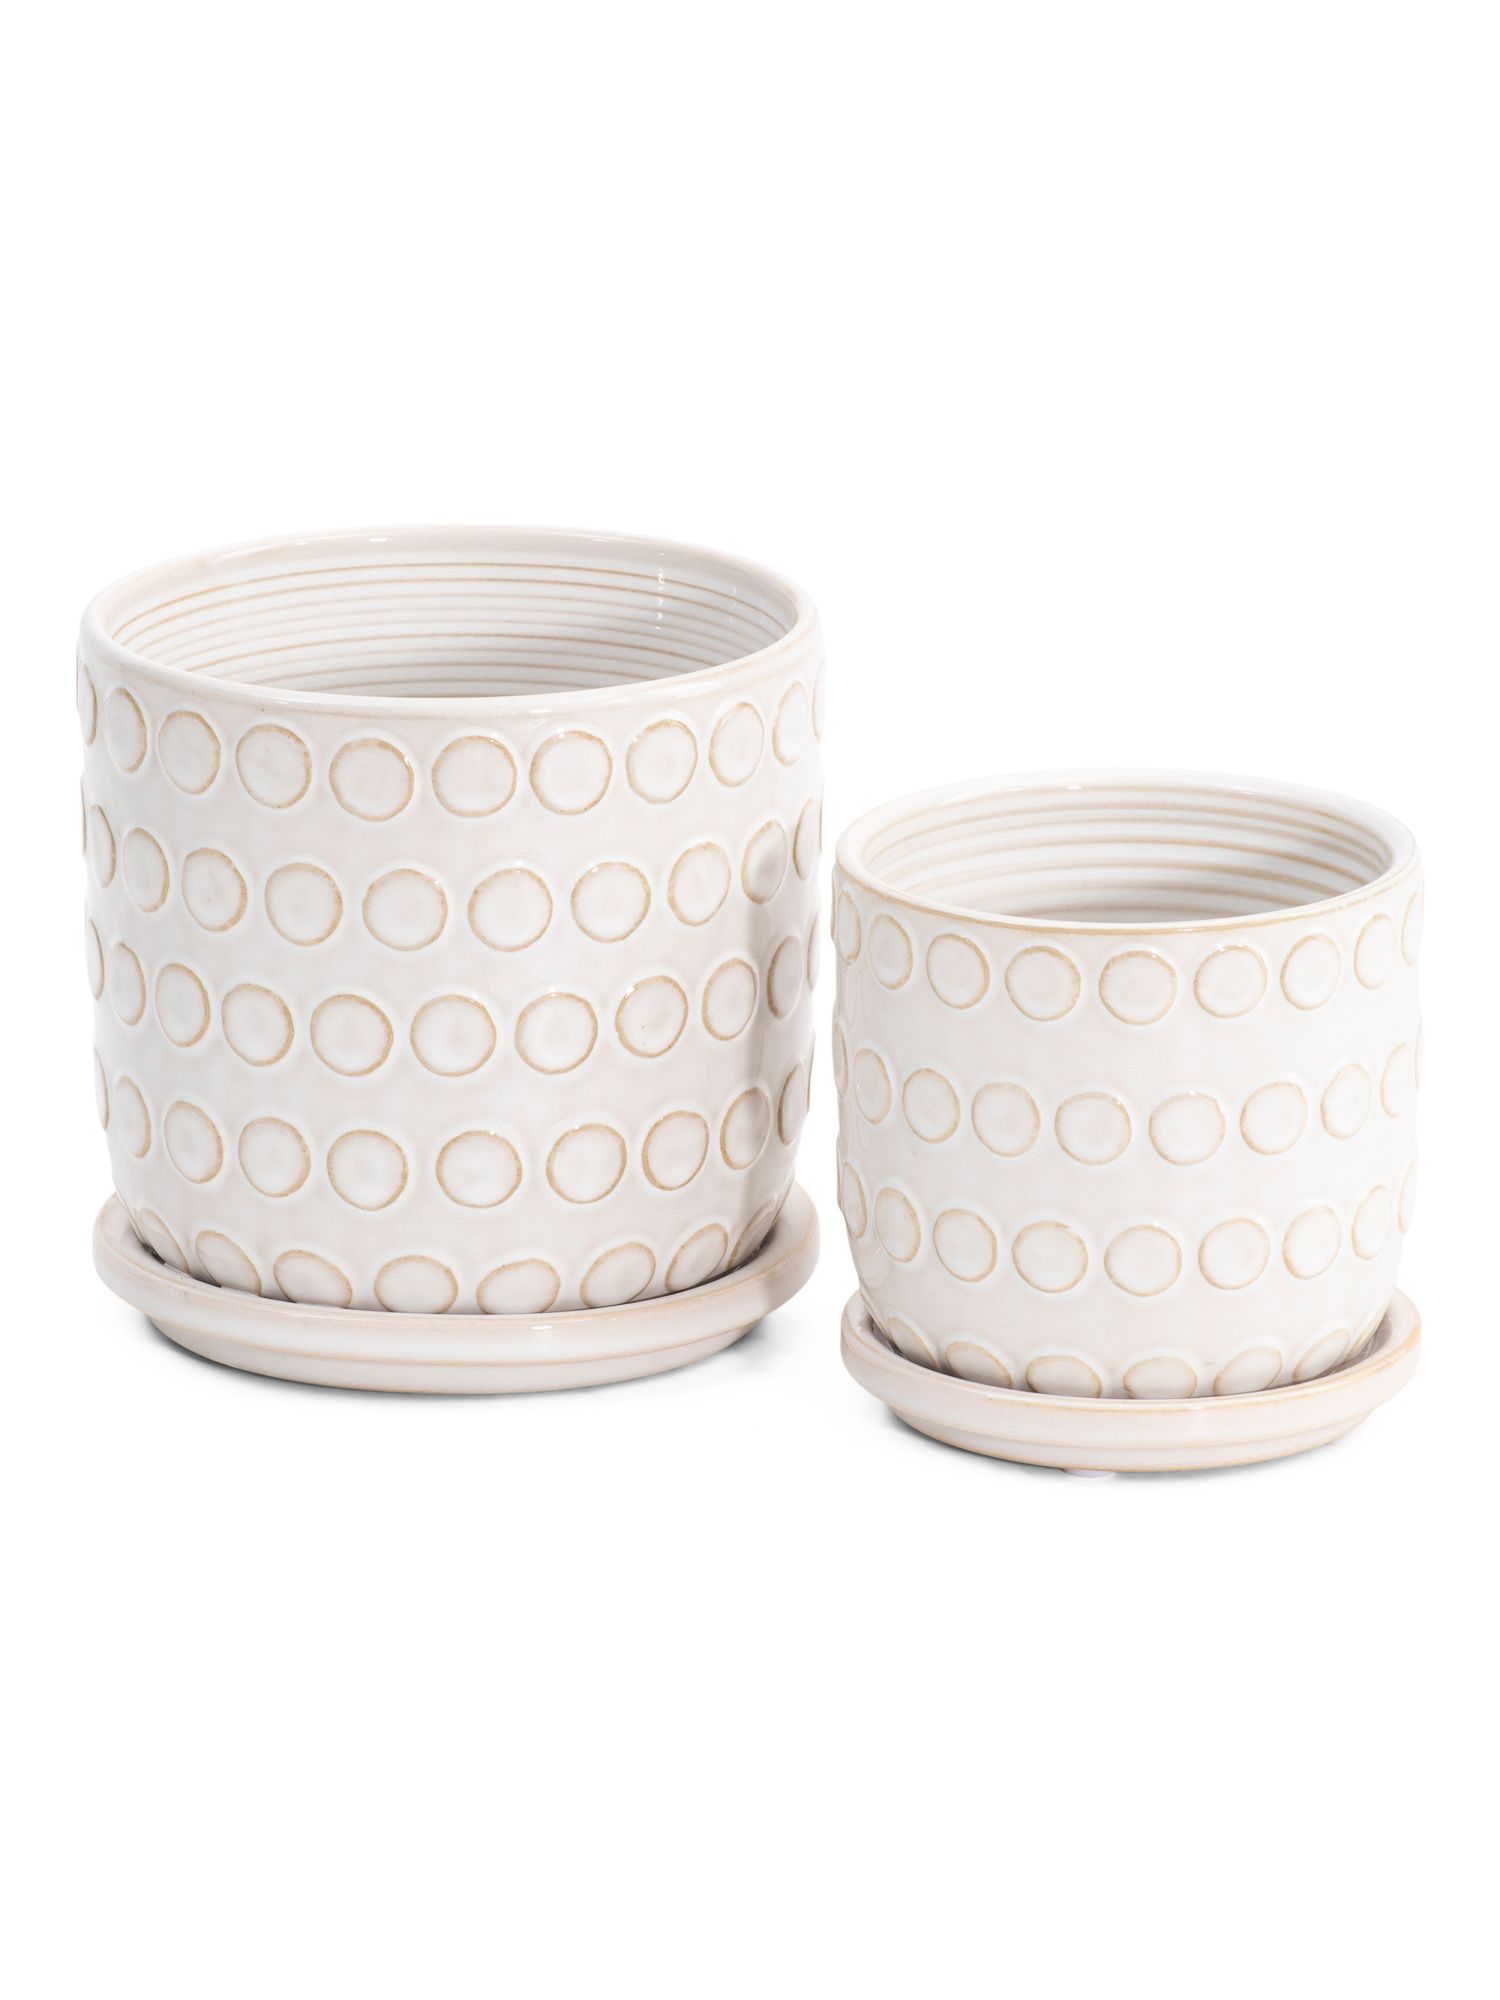 Set Of 2 Bubbles Planters With Saucer | TJ Maxx